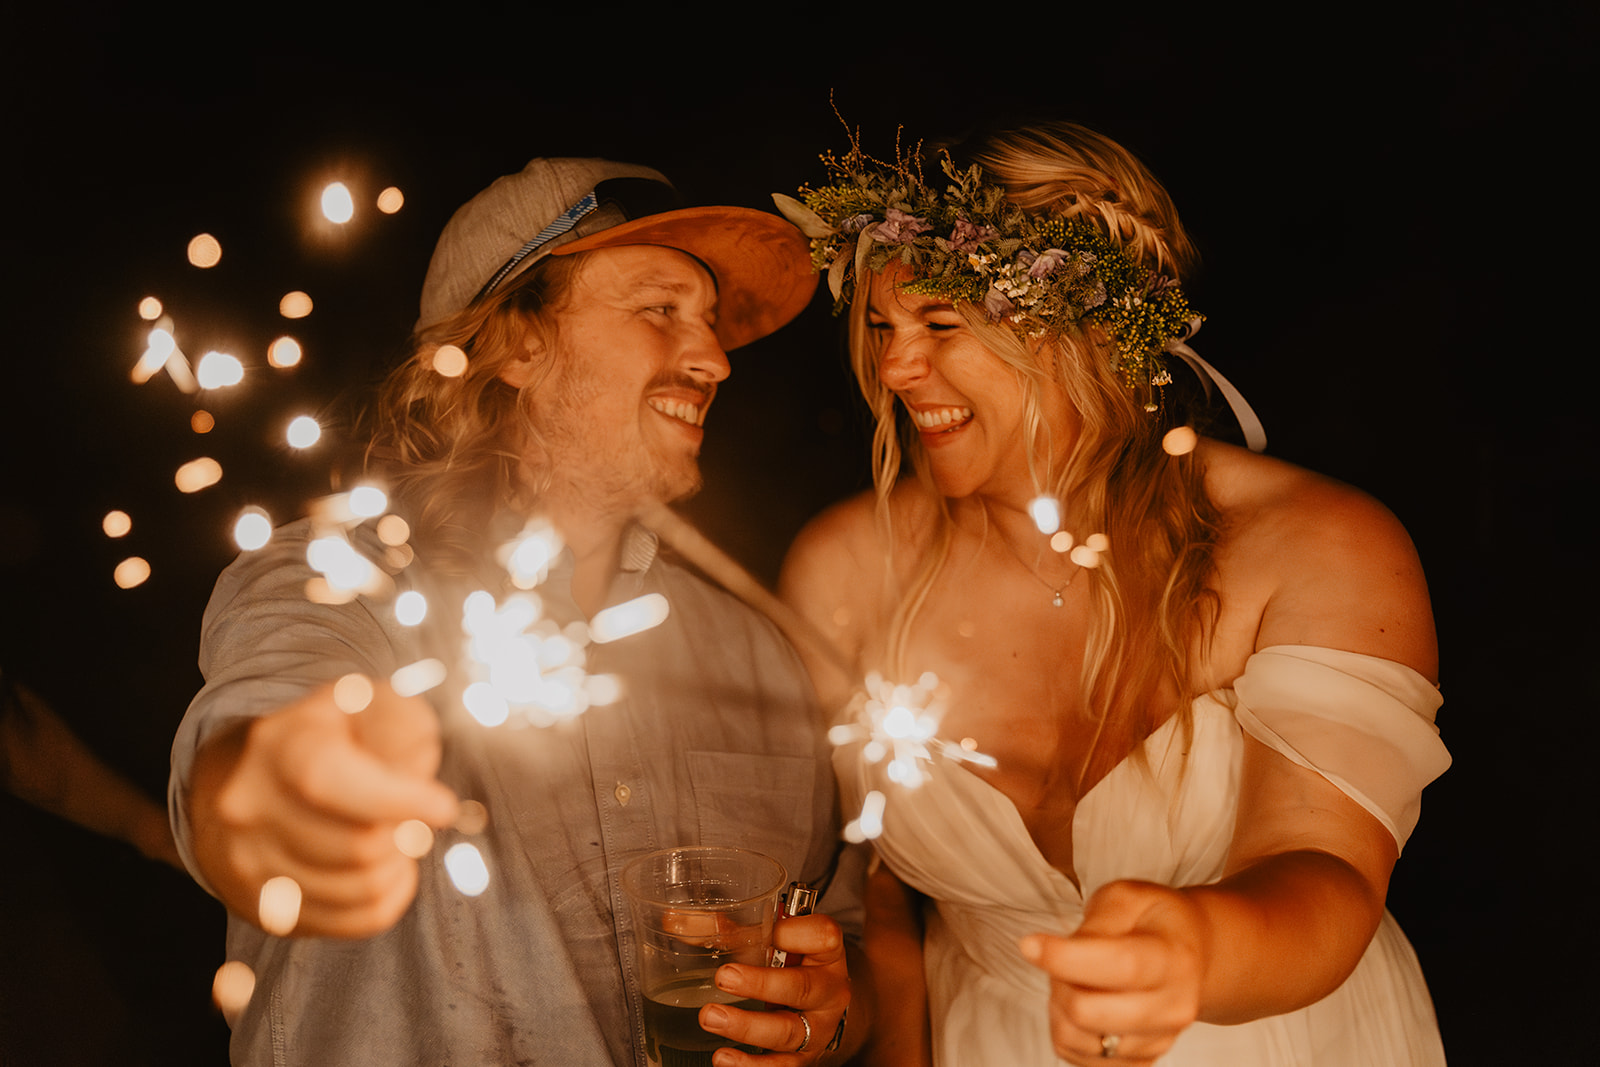 Bride and Groom sparklers at a wedding at Mac's Farm in Sussex. By OliveJoy Photography.